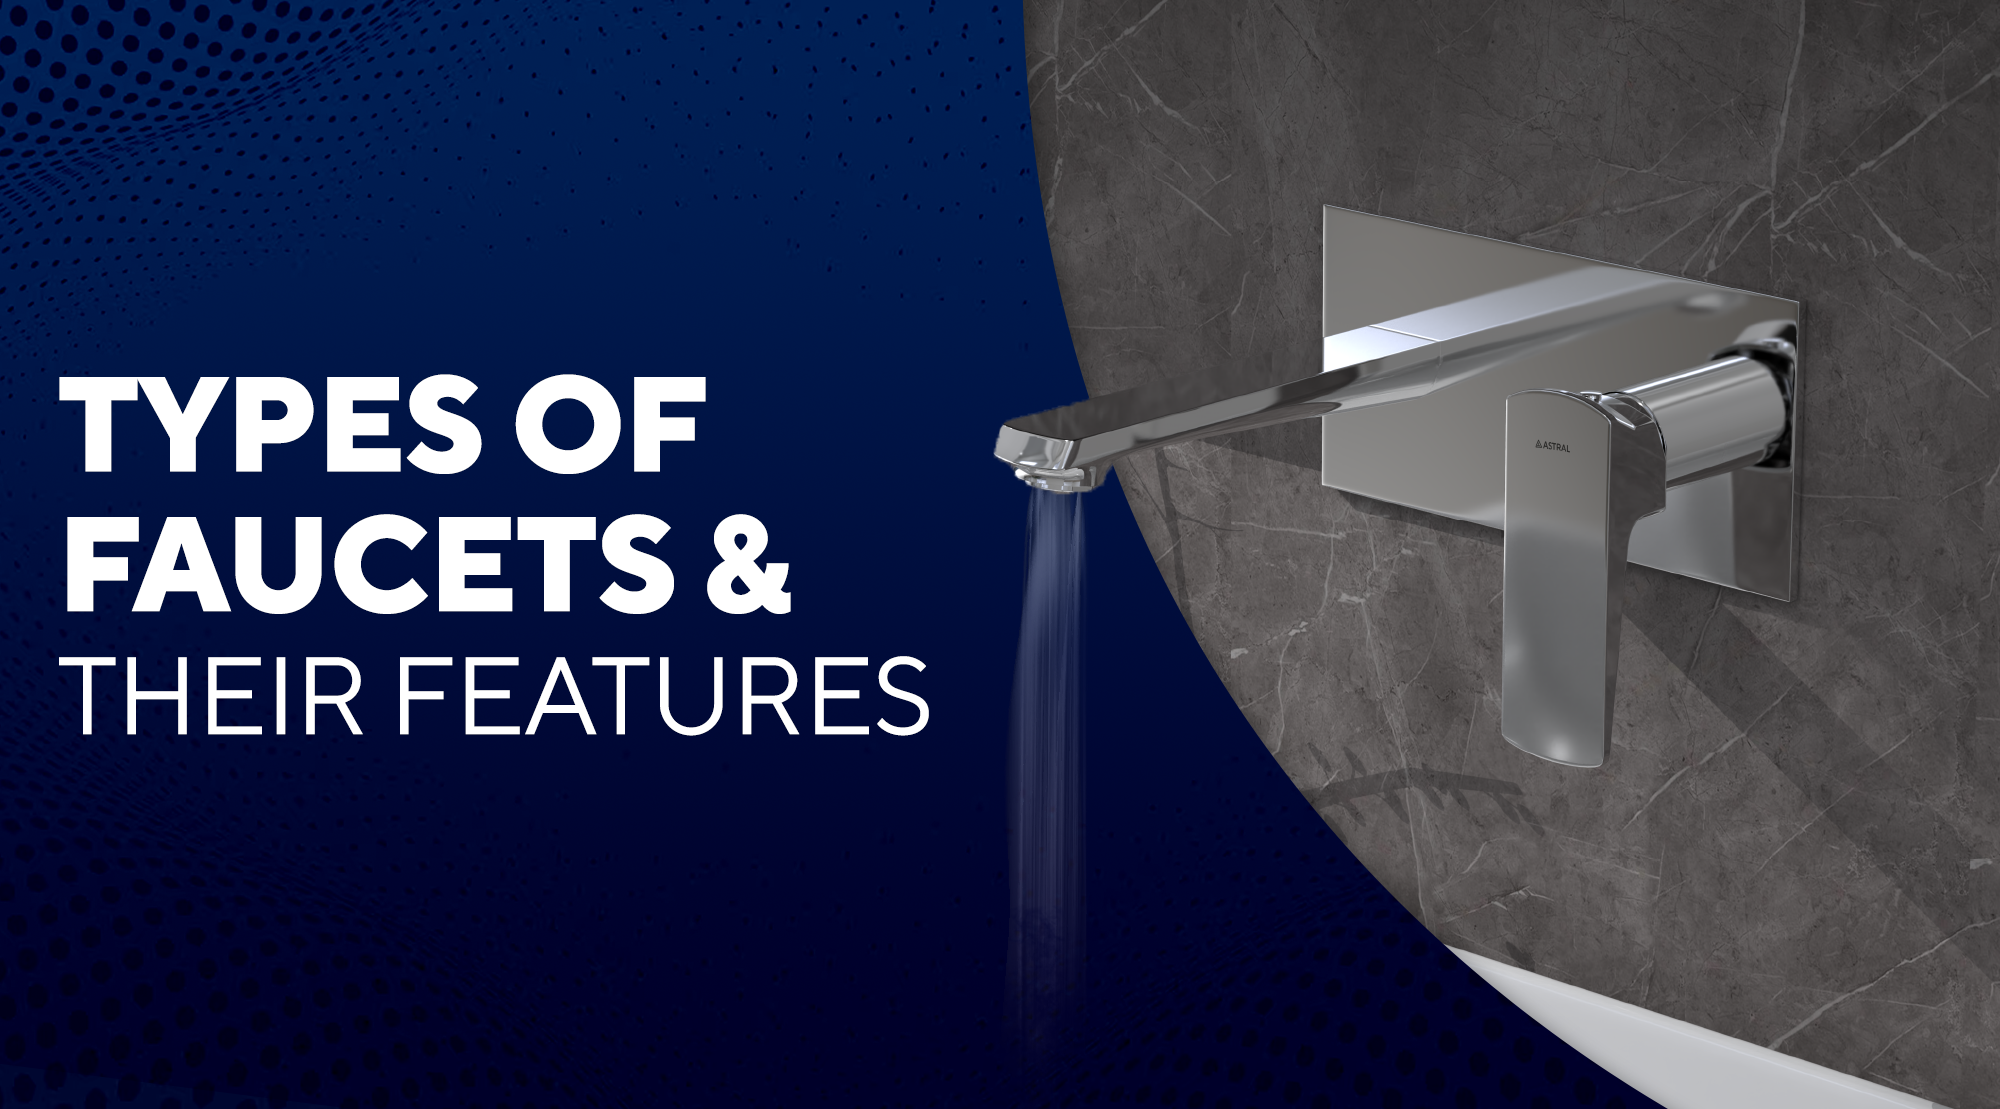 Types of Faucets